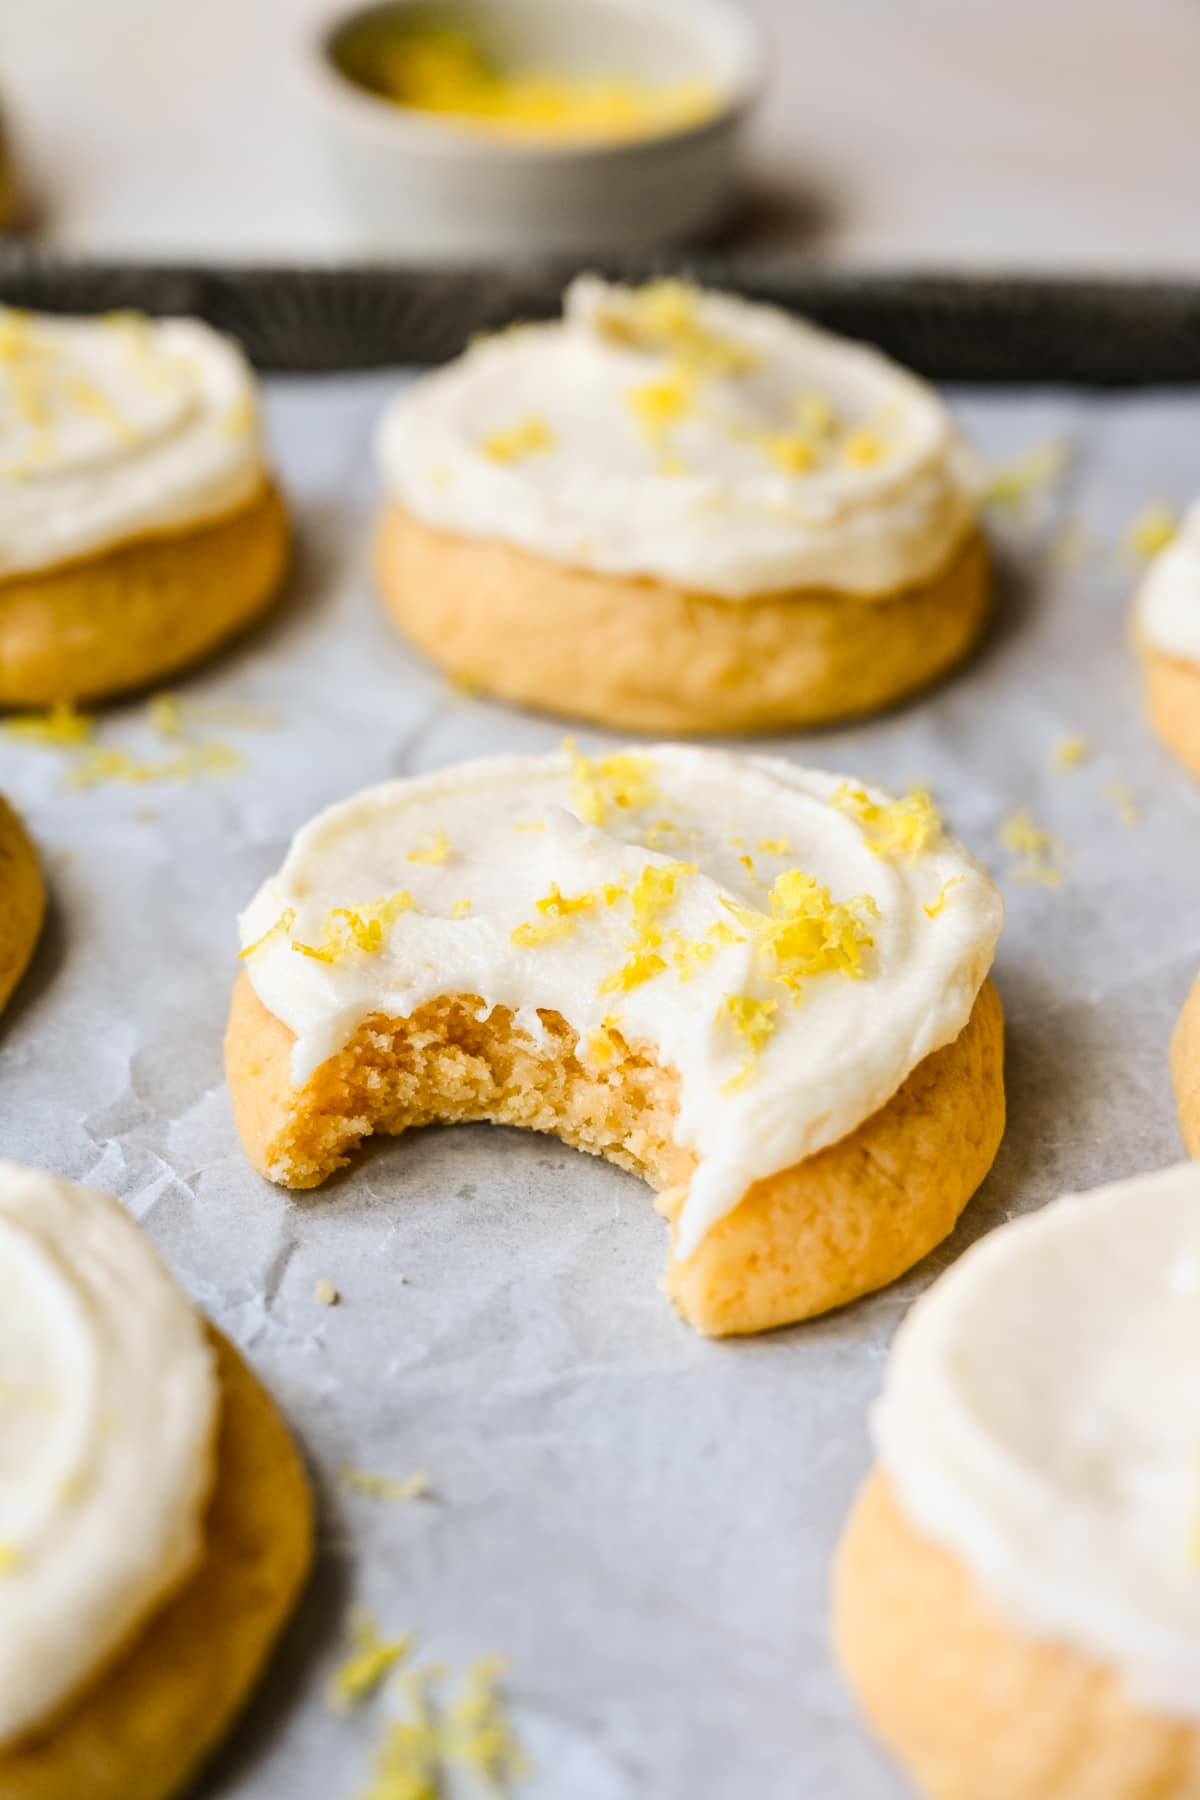 A frosted lemon sugar cookie with a bite missing.